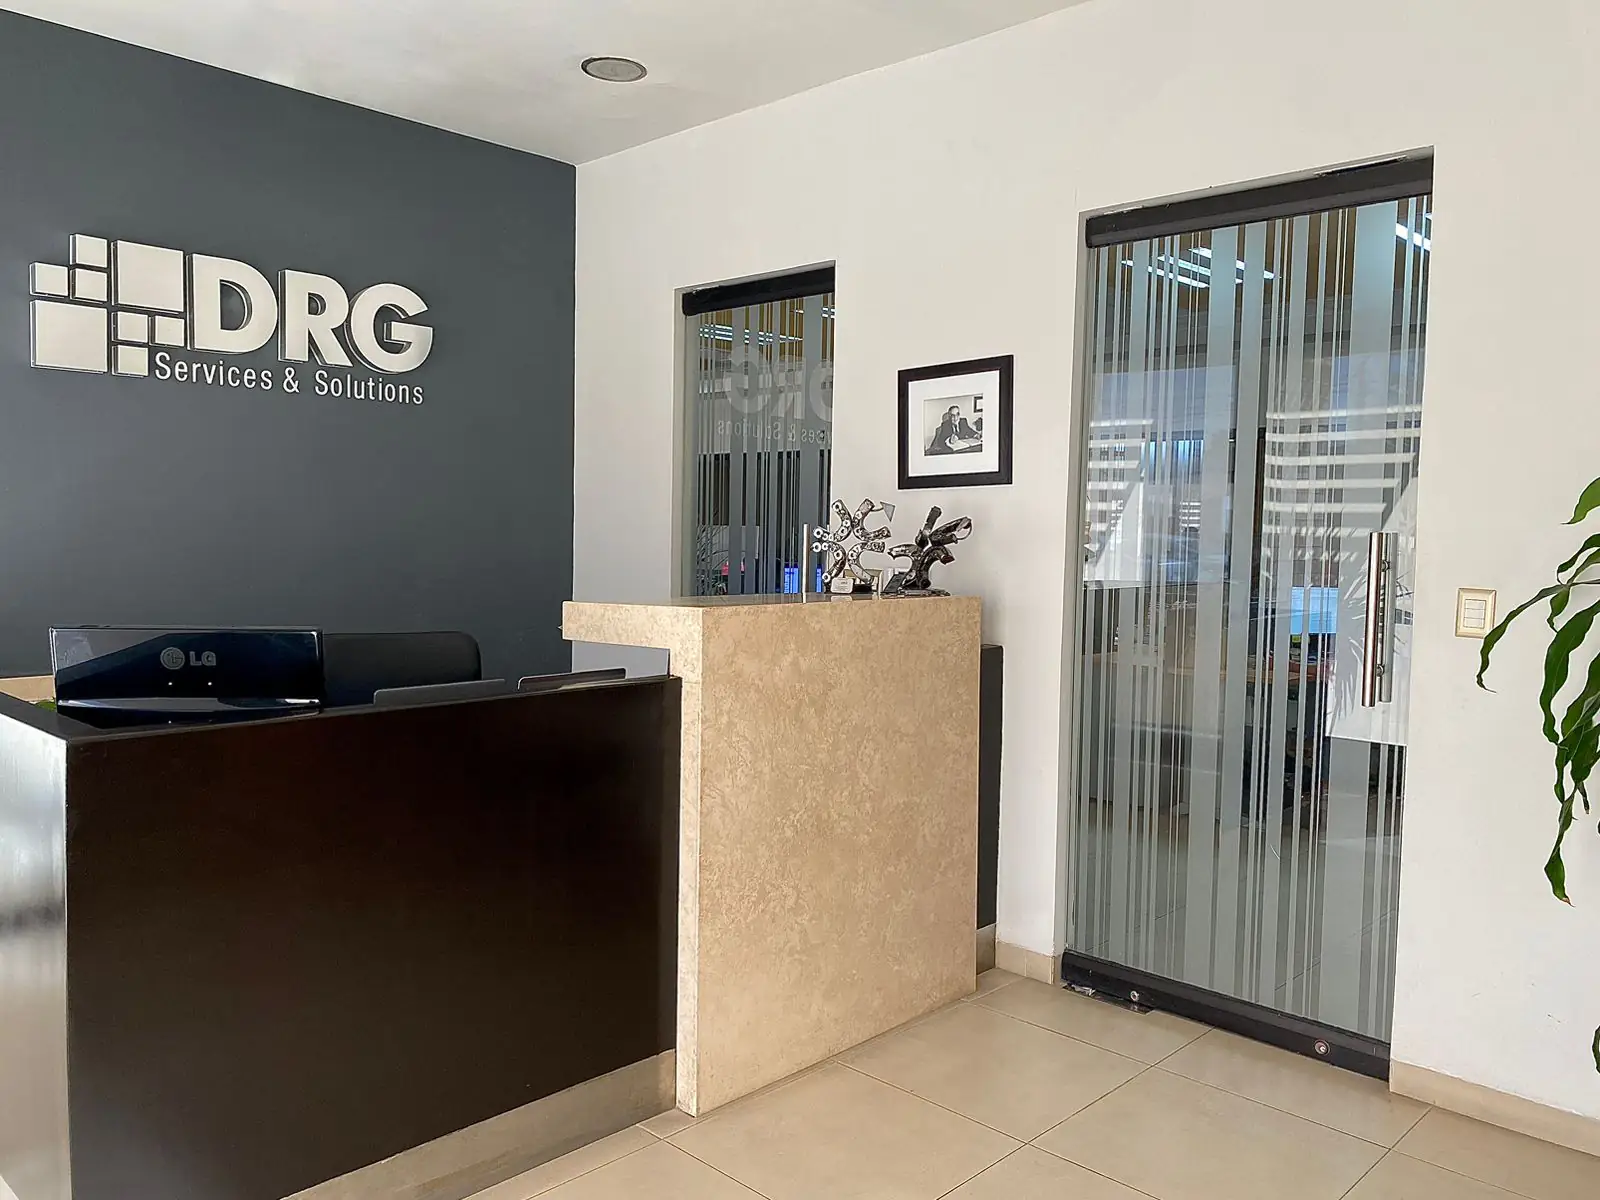 drg real estate & business, contacto.